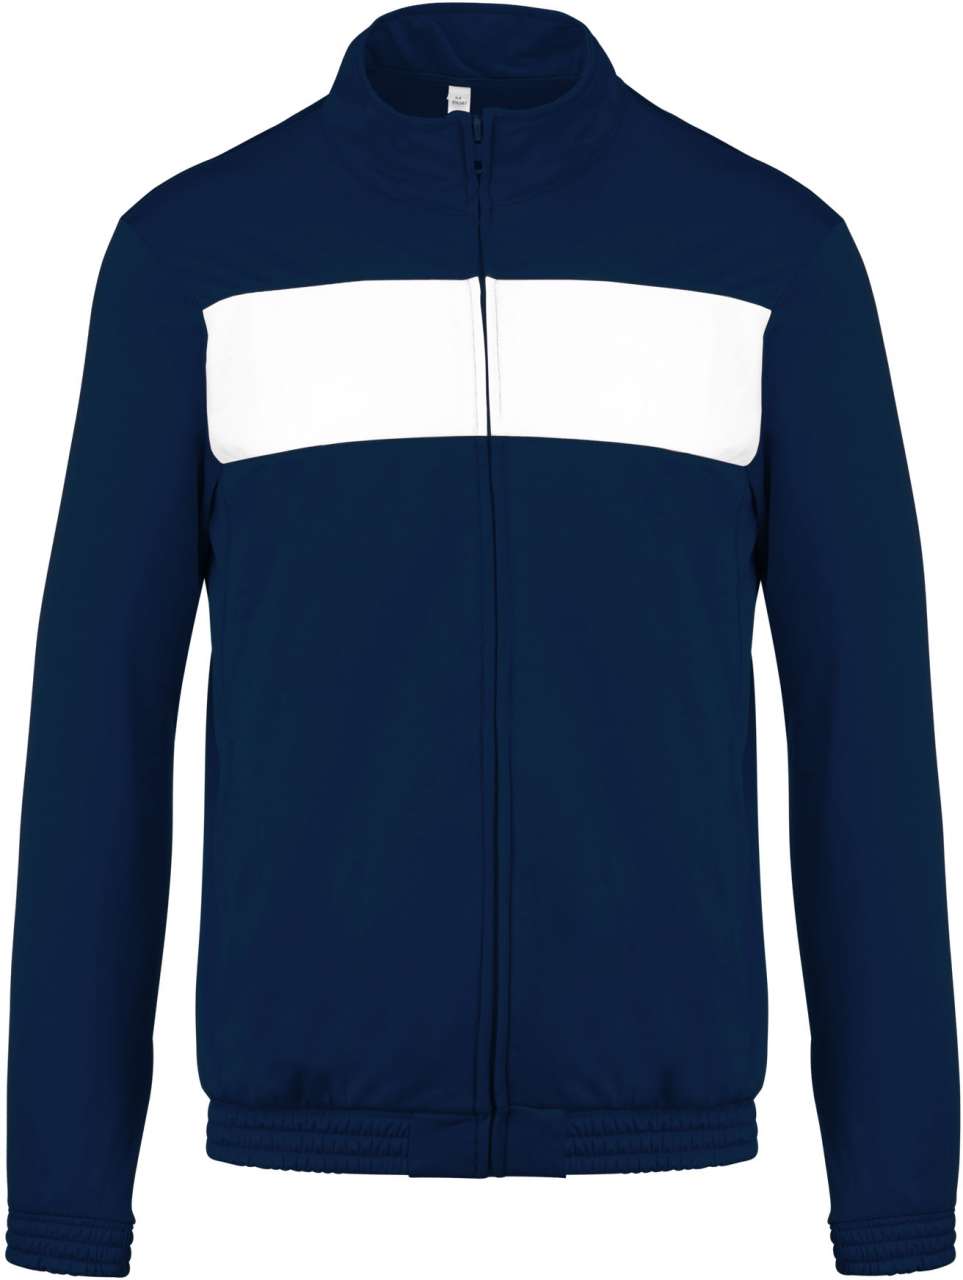 Promo  ADULT TRACKSUIT TOP